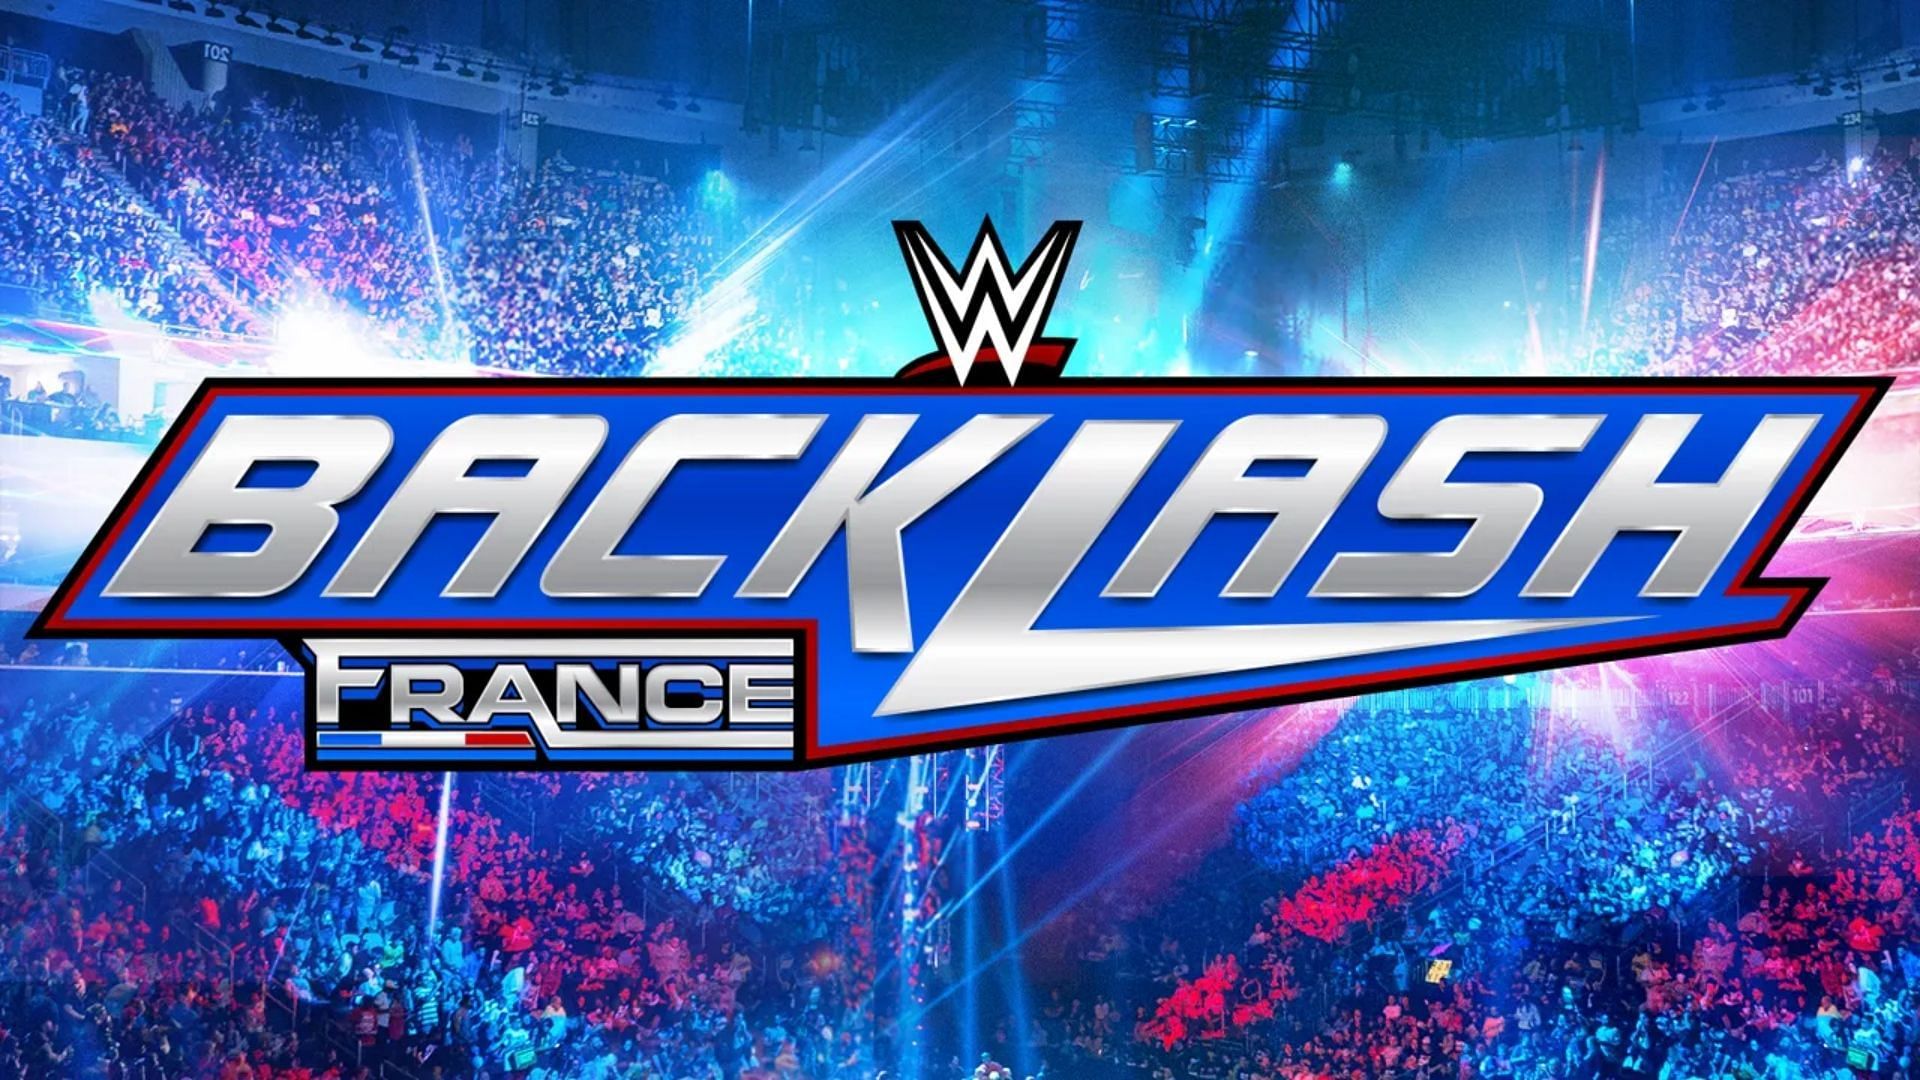 Backlash will take play on May 4th in Lyon, France.